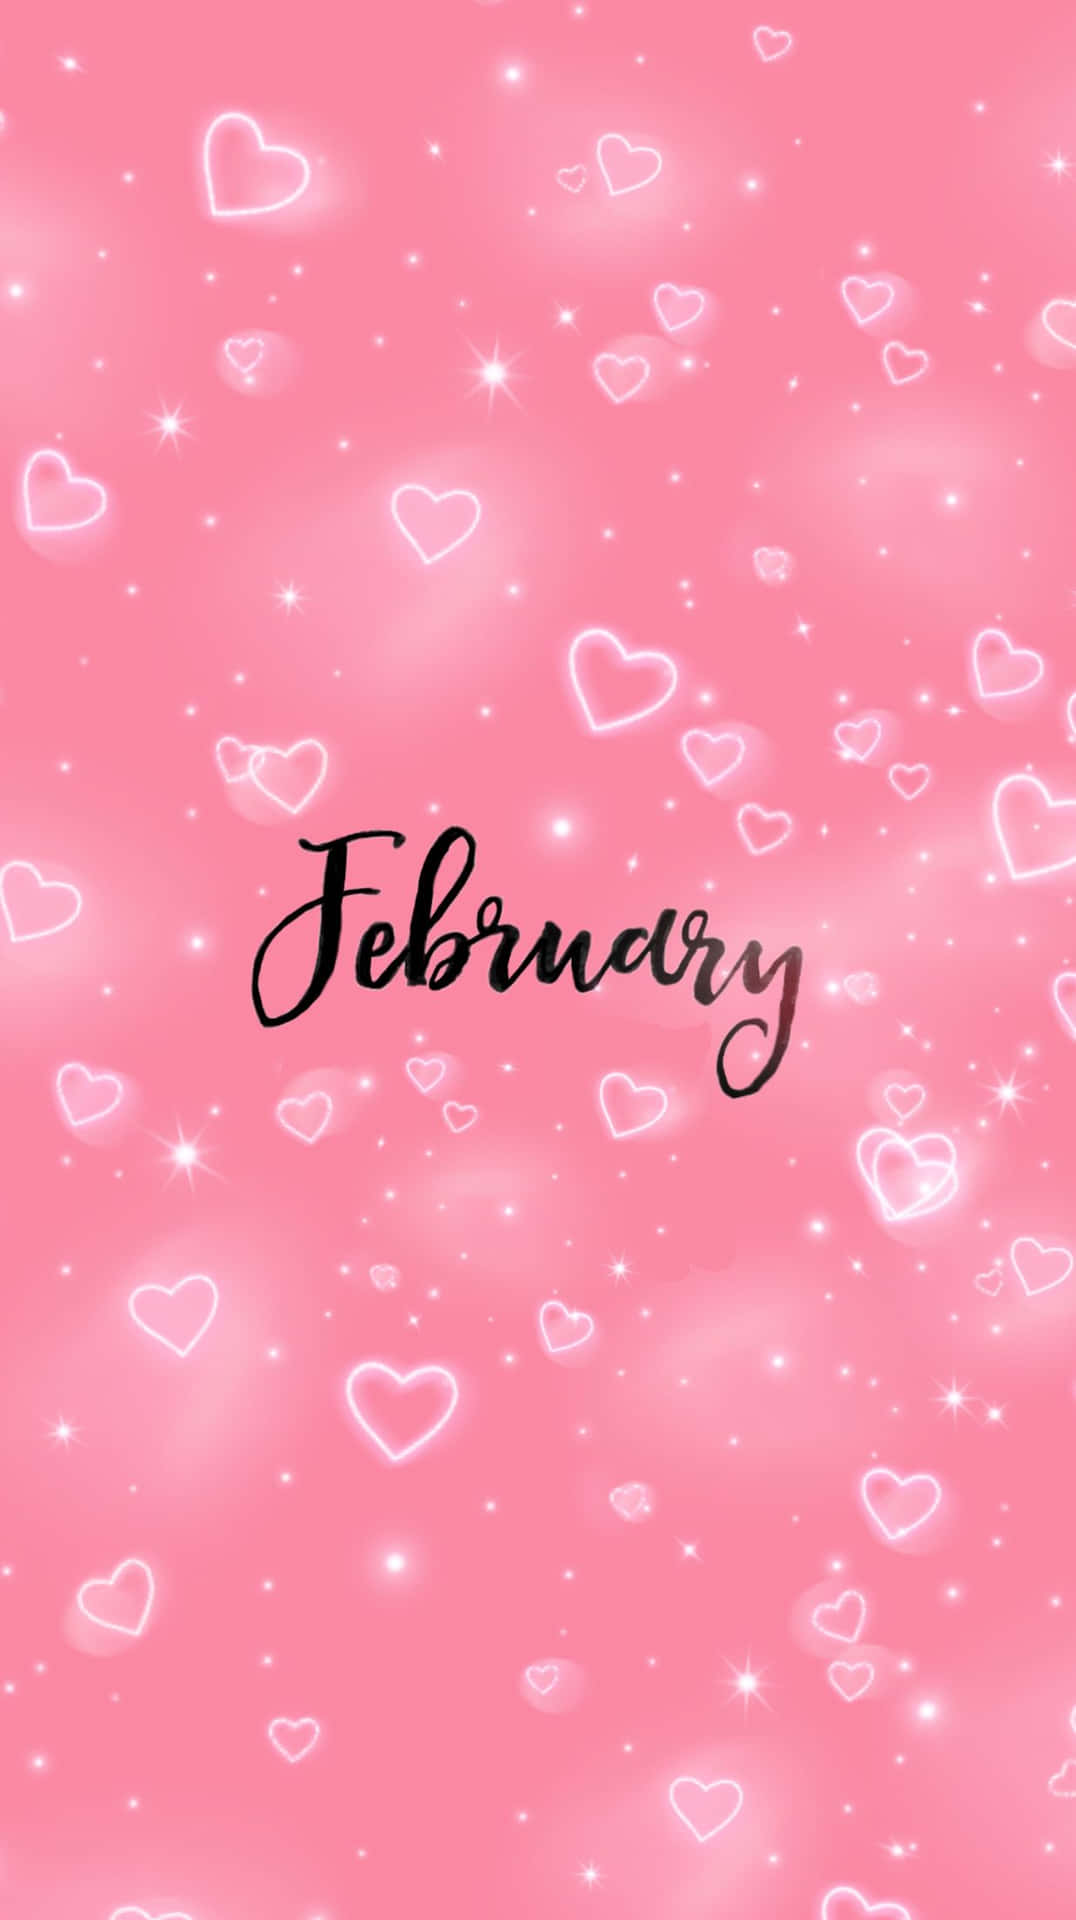 February Love Hearts Pink Background Wallpaper